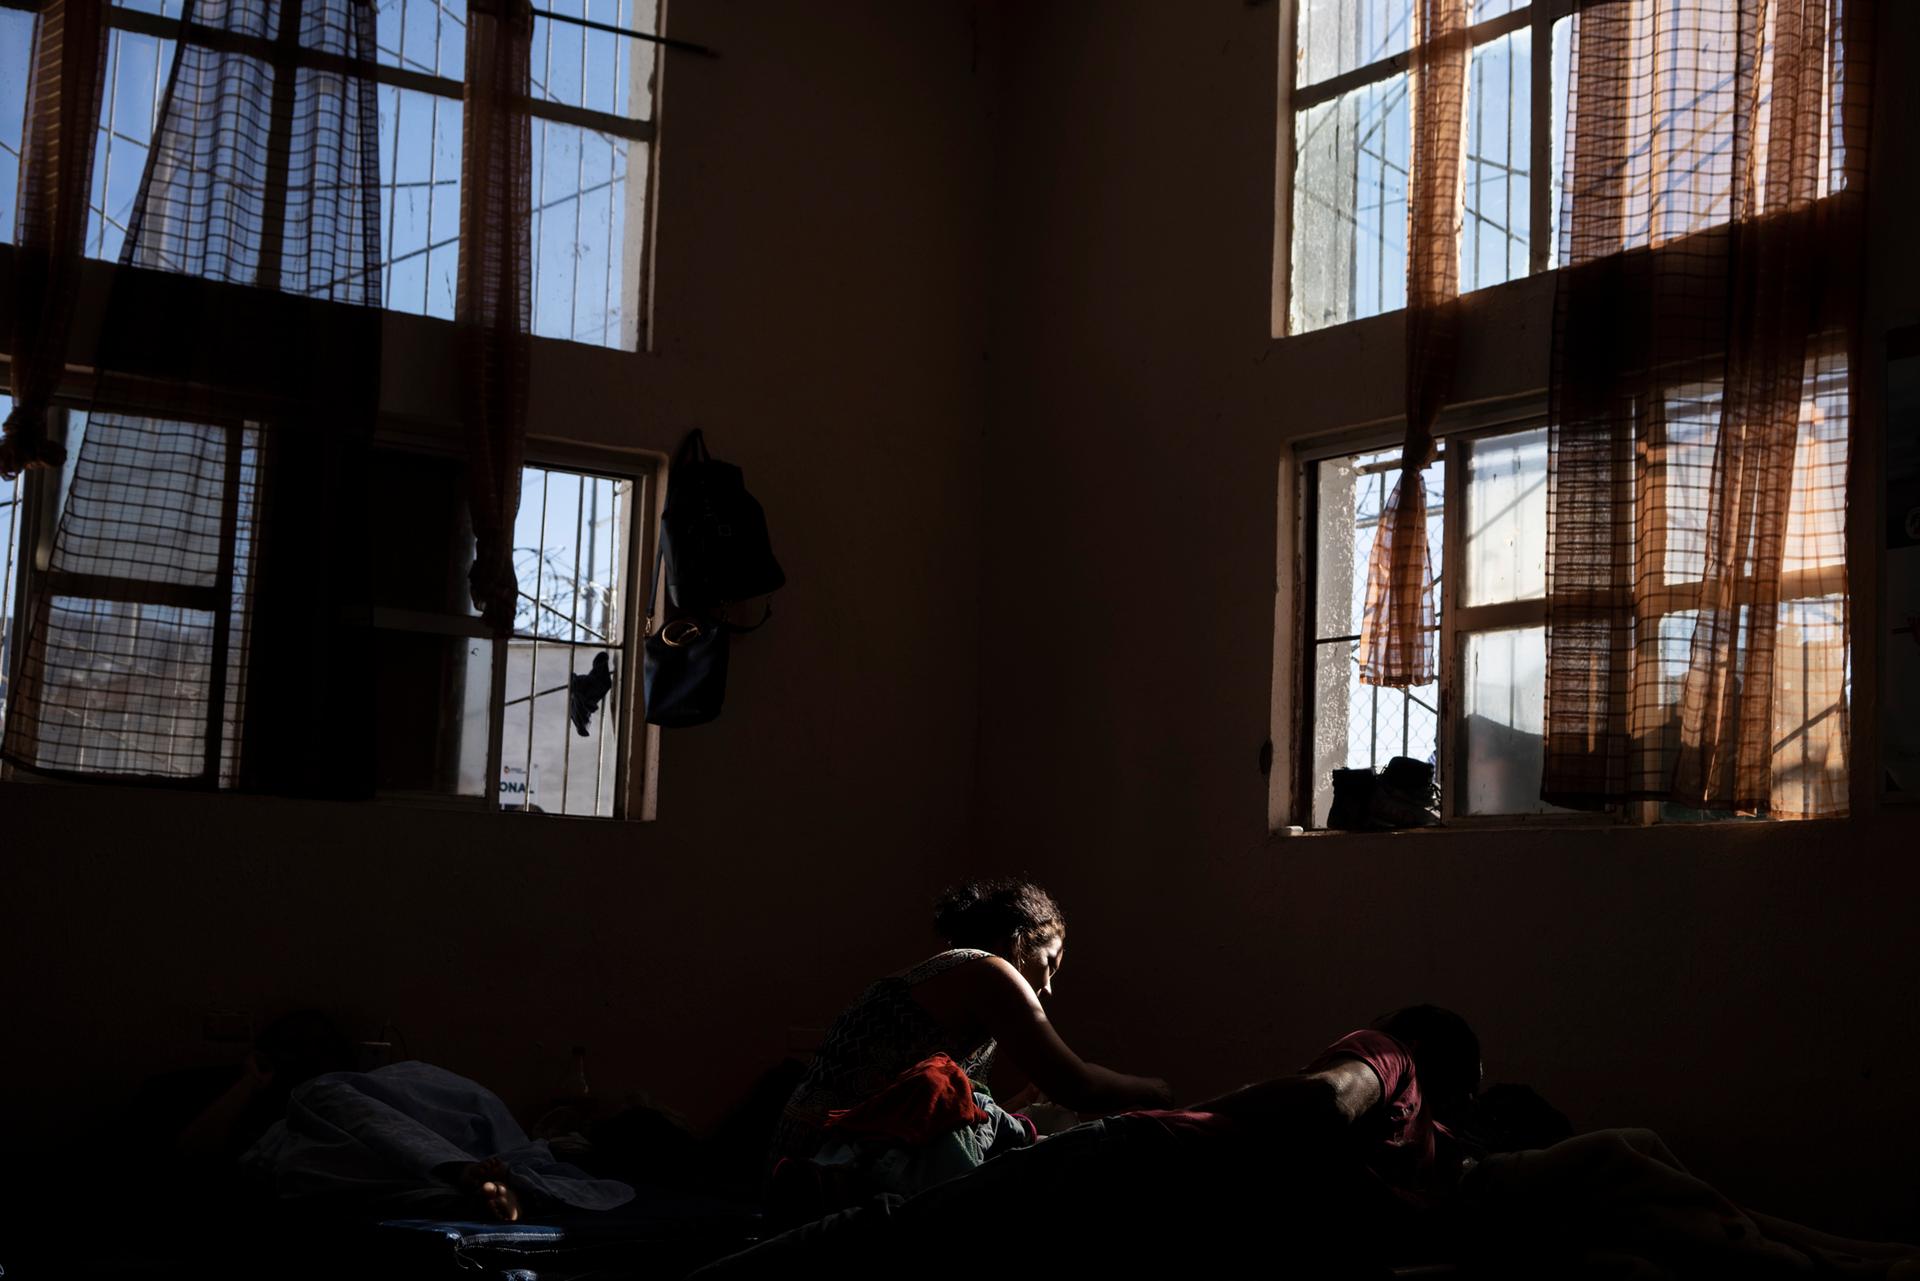 People rest in a shelter as light spills in from a window